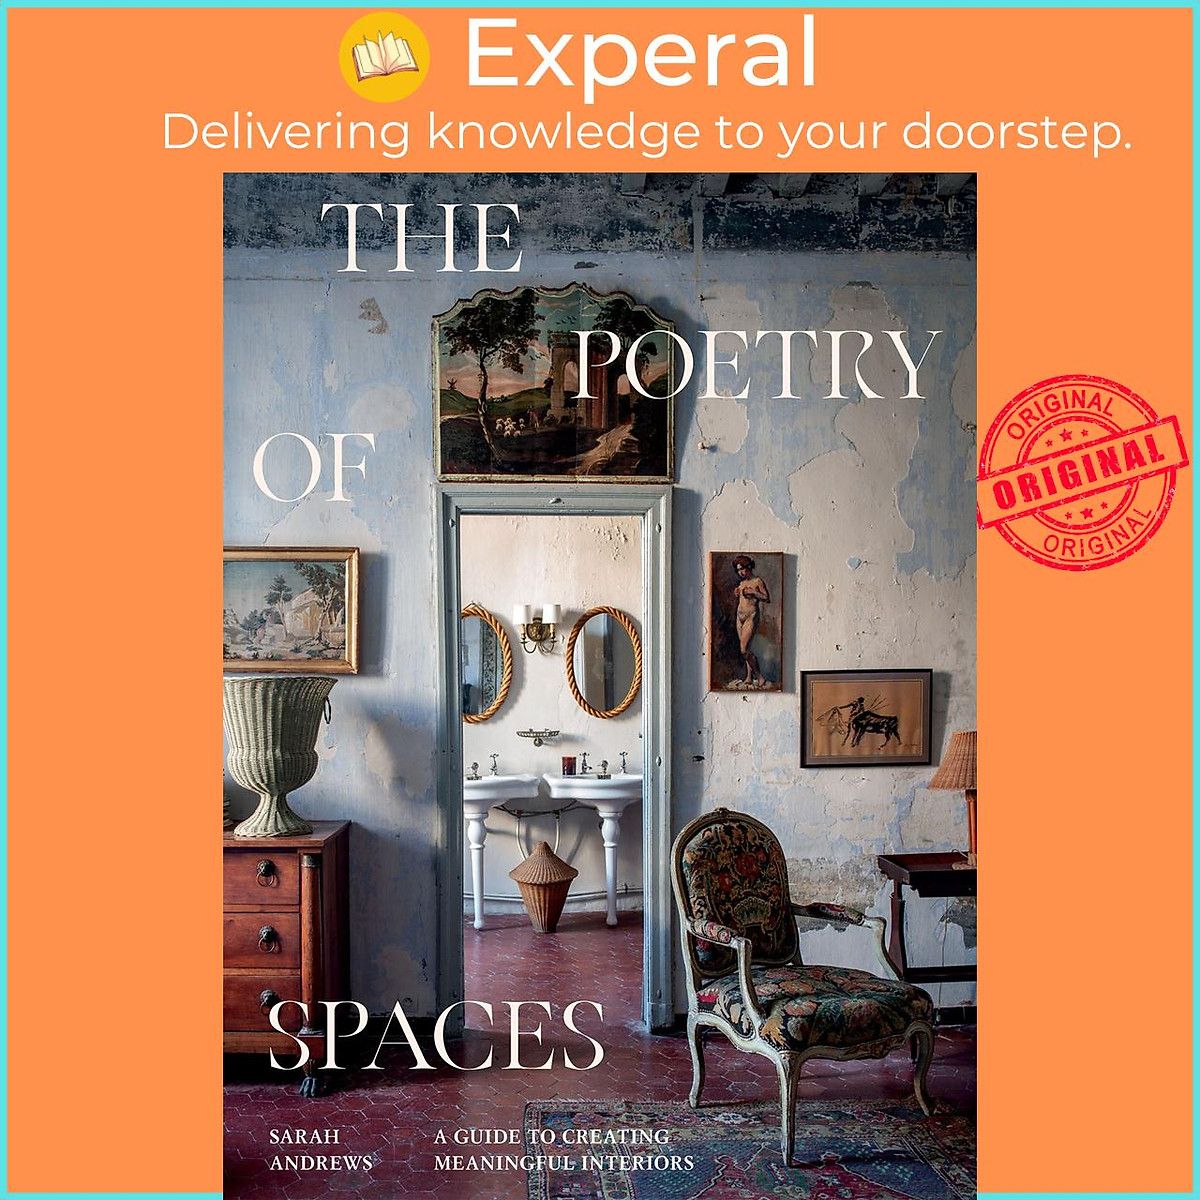 Sách - The Poetry of Spaces - A Guide to Creating Meaningful Interiors by Sarah Andrews (UK edition, Hardcover)